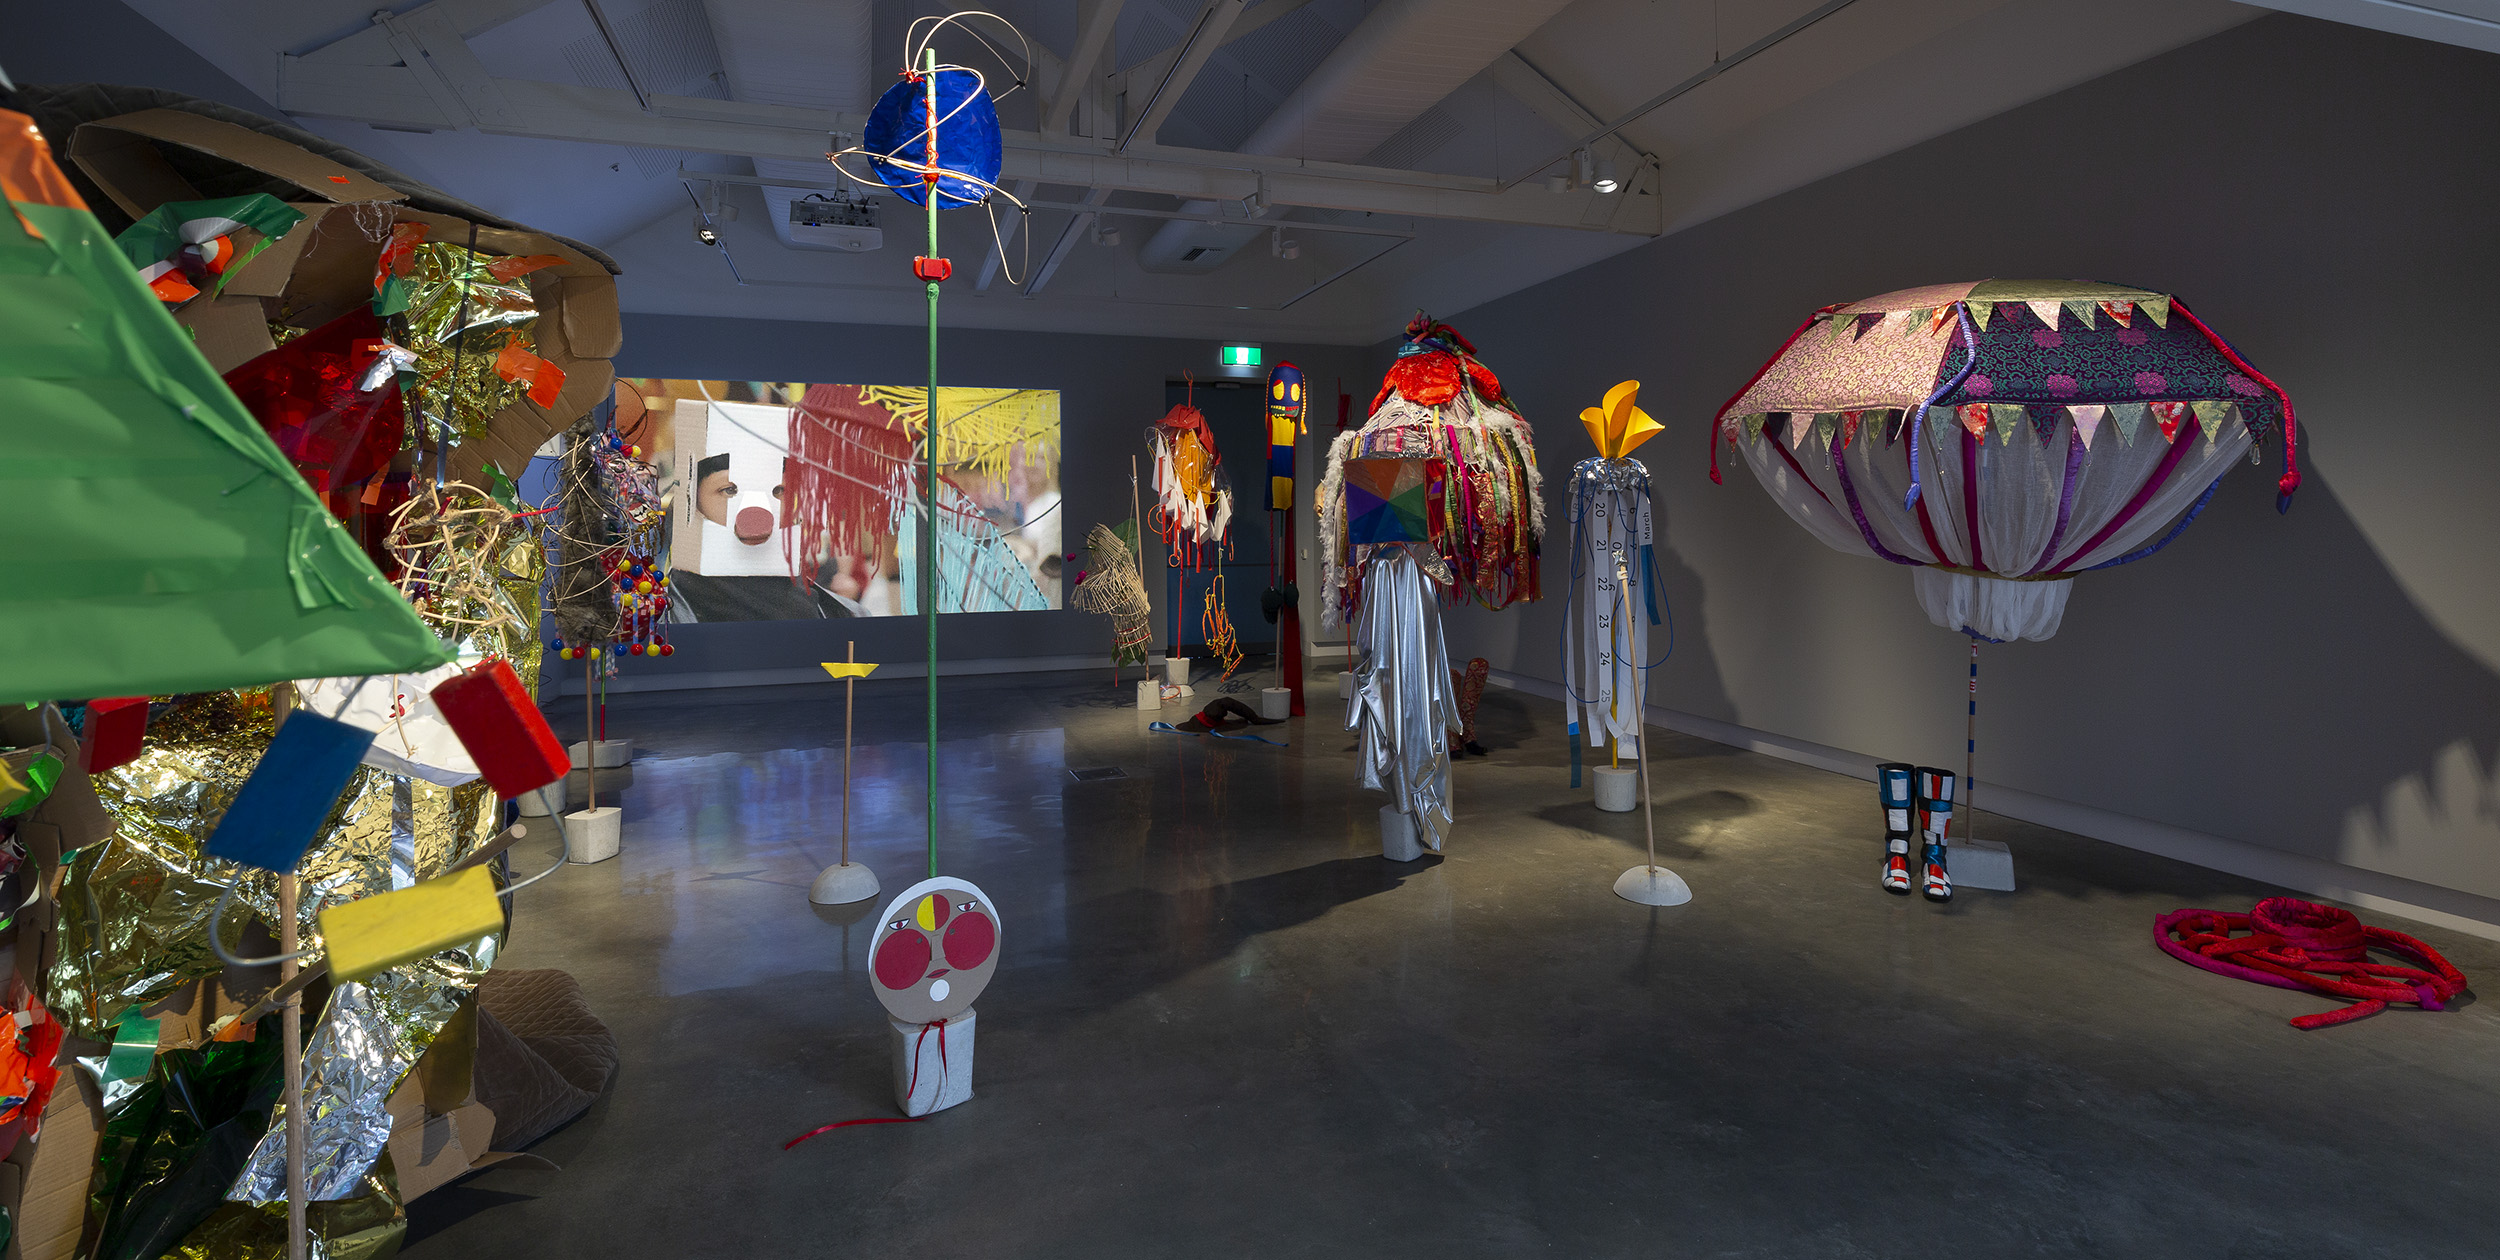 Mikala Dwyer and Justene Williams, Mondspiel (Moon Play), 2019, works by students from VCA, QCA & RMIT | Bauhaus Now!, curated by Ann Stephen, Buxton Contemporary, Melbourne (photo: Christian Capurro)